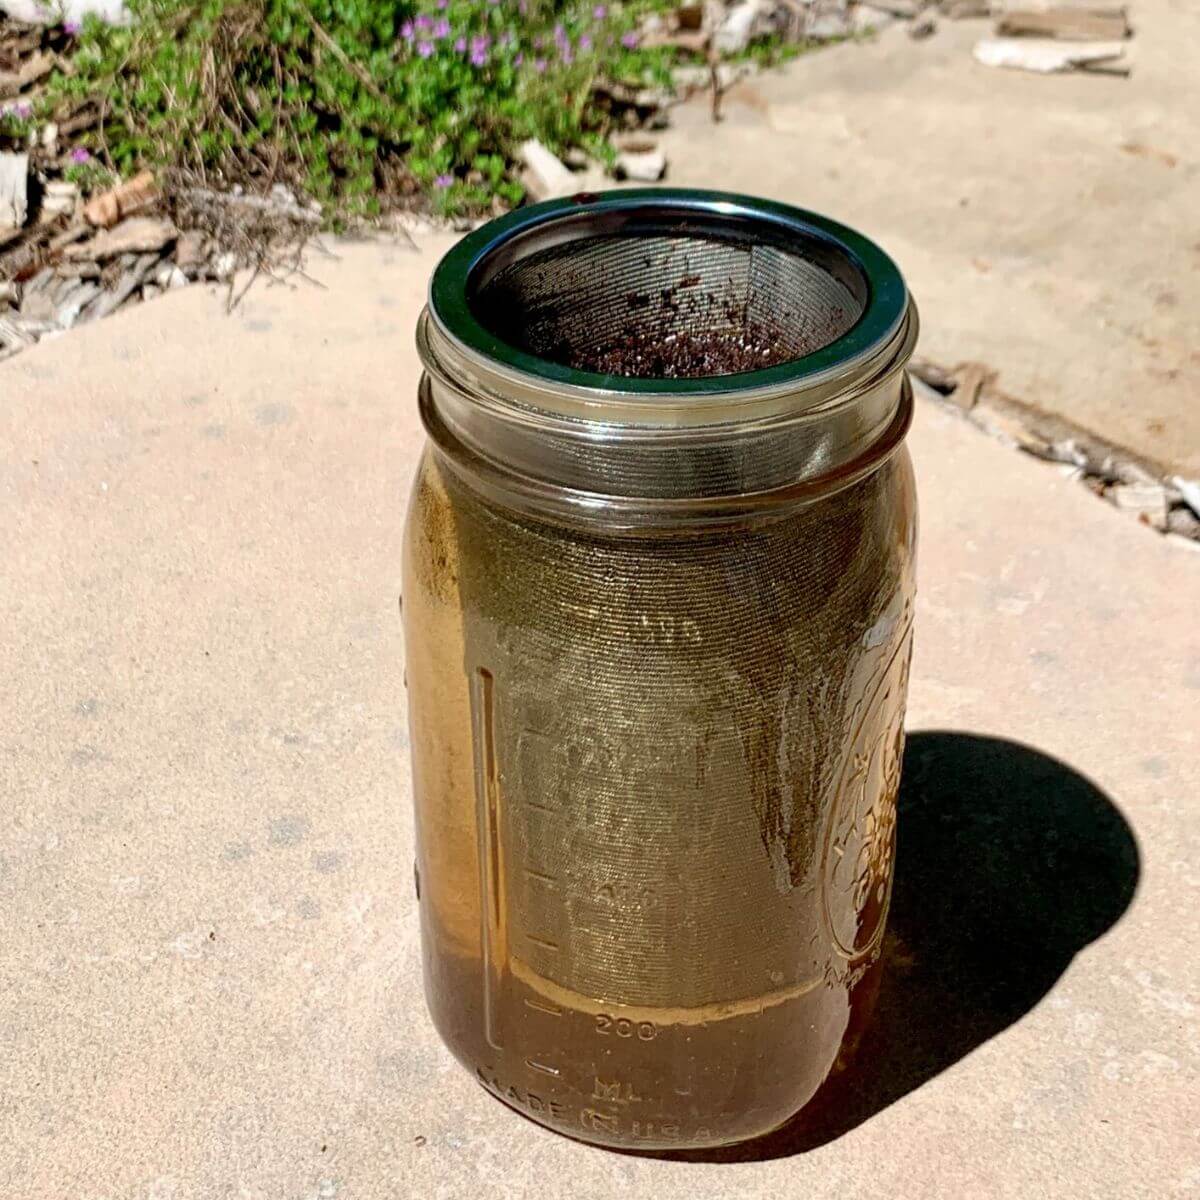 cold brew grounds mesh inset in mason jar, on flagstone.